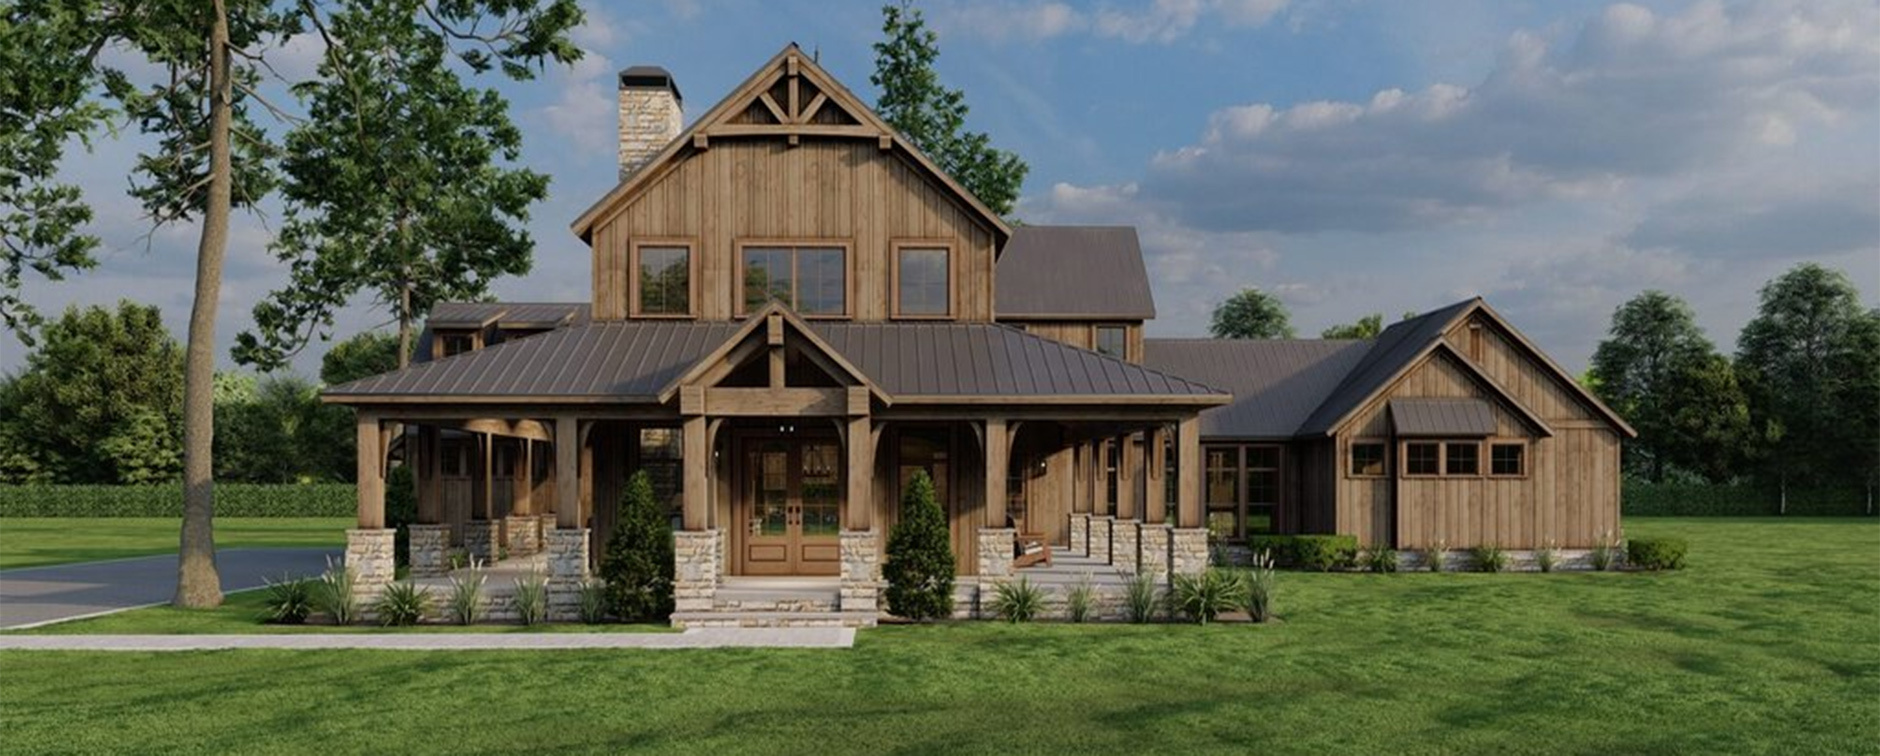 Farmhouse Home Plan with Mother In-Law Suite 923-340